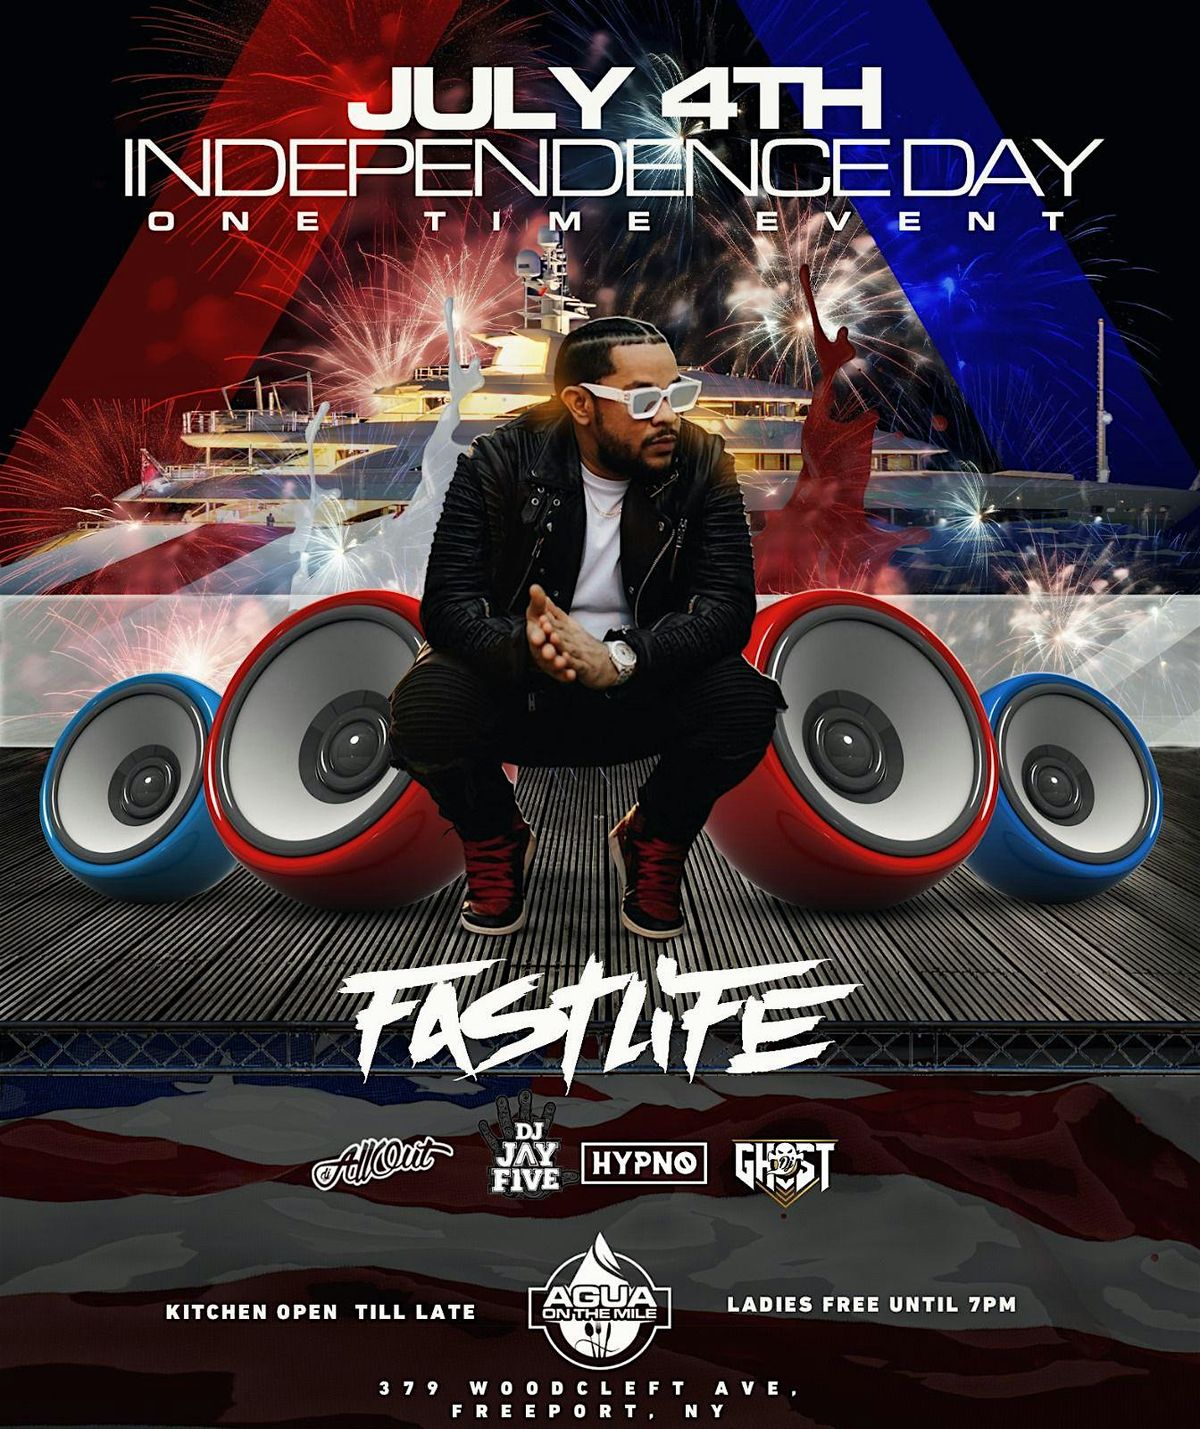 July 4th Independence Day One Time Event At Aqua on The Nile